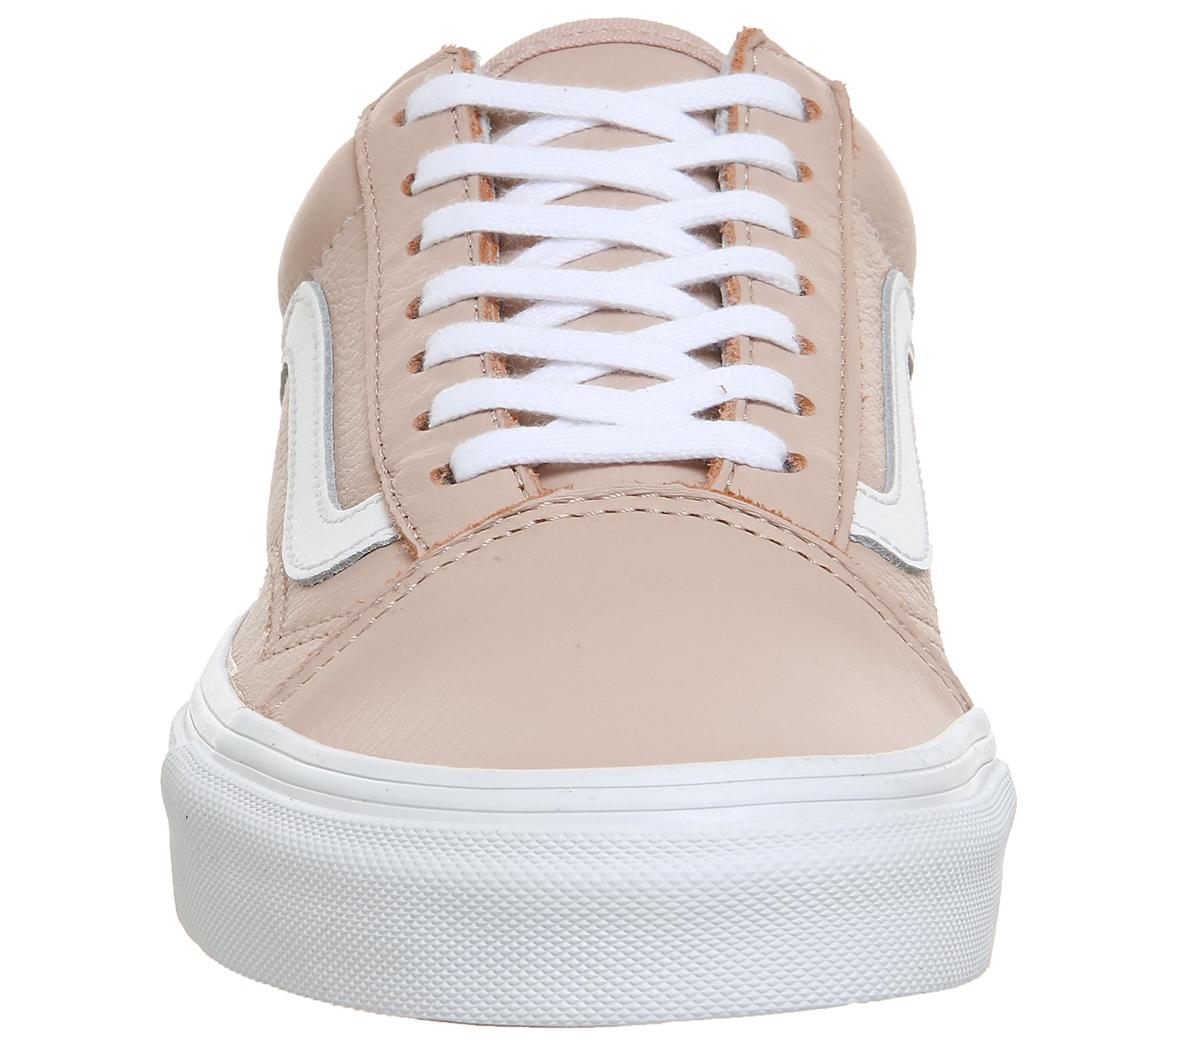 vans old skool trainers oxford evening sand leather